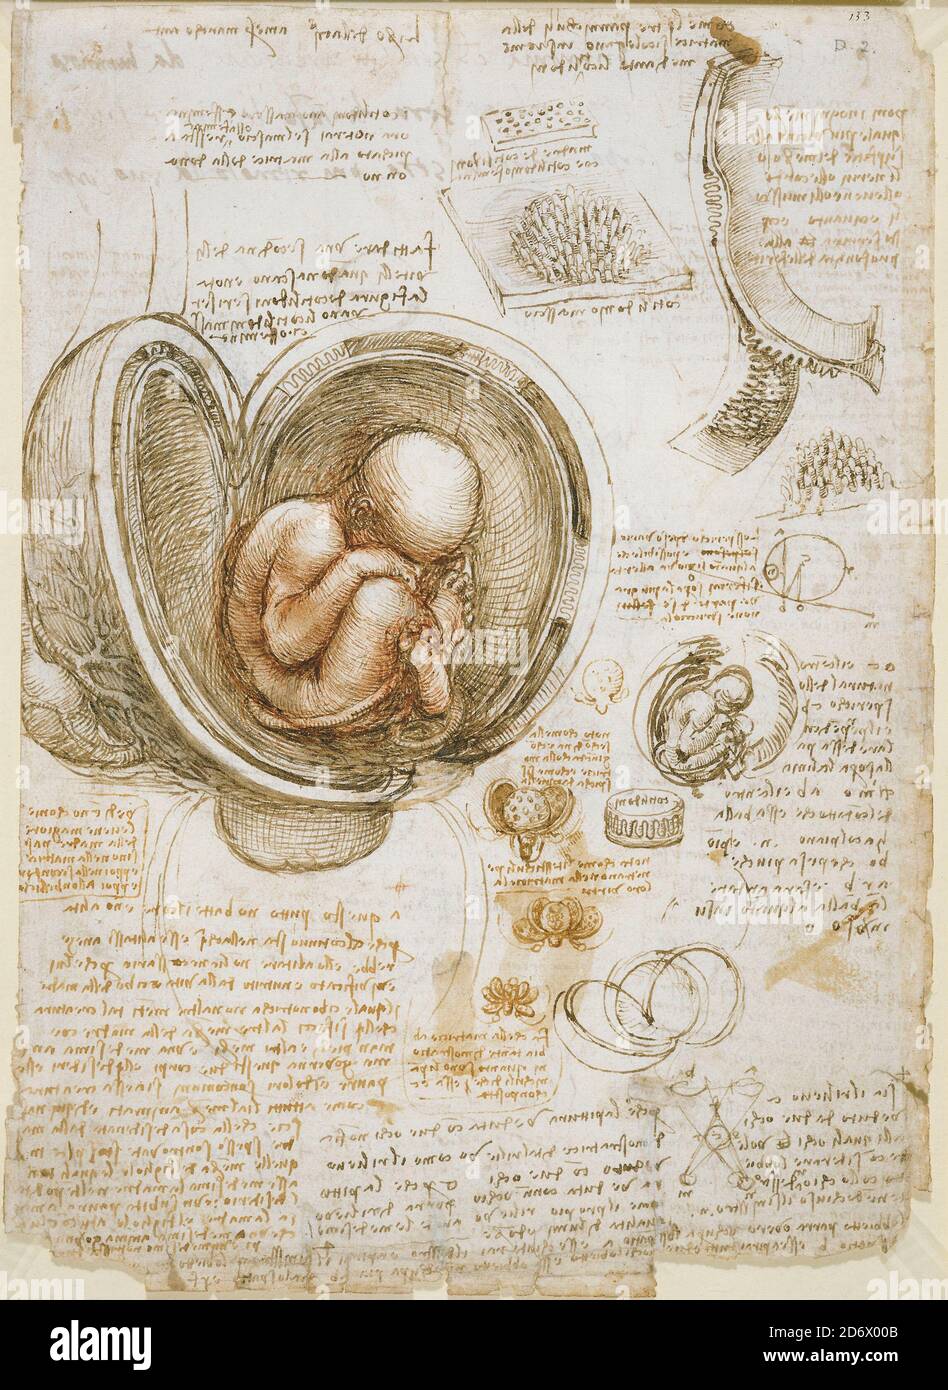 Title: Studies of the fetus in the womb Creator: Leonardo Da Vinci Date: c.1510-13 Medium: pen and ink with wash over red and black chalks on paper Dimensions: 30.4 x 22 cm Location: Royal Collection Trust Stock Photo